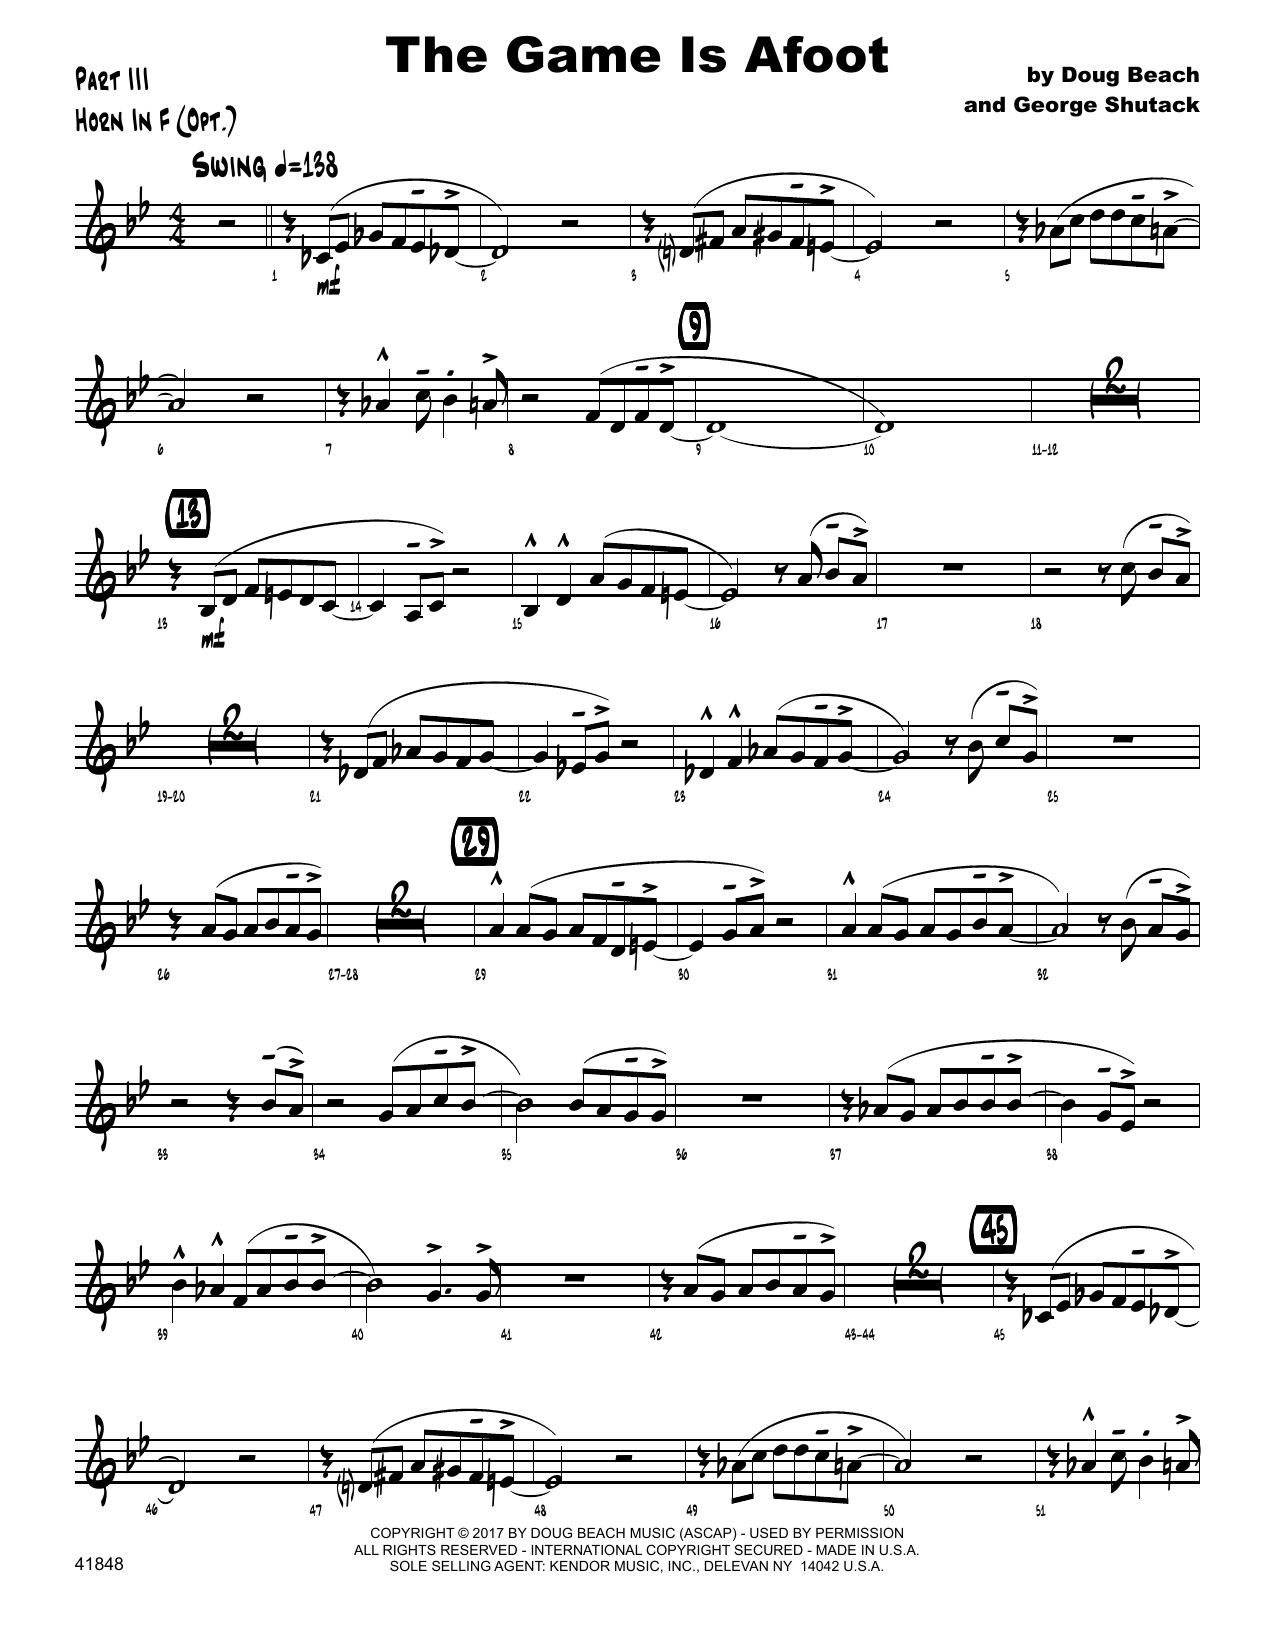 Download Doug Beach & George Shutack The Game Is Afoot - Horn in F Sheet Music